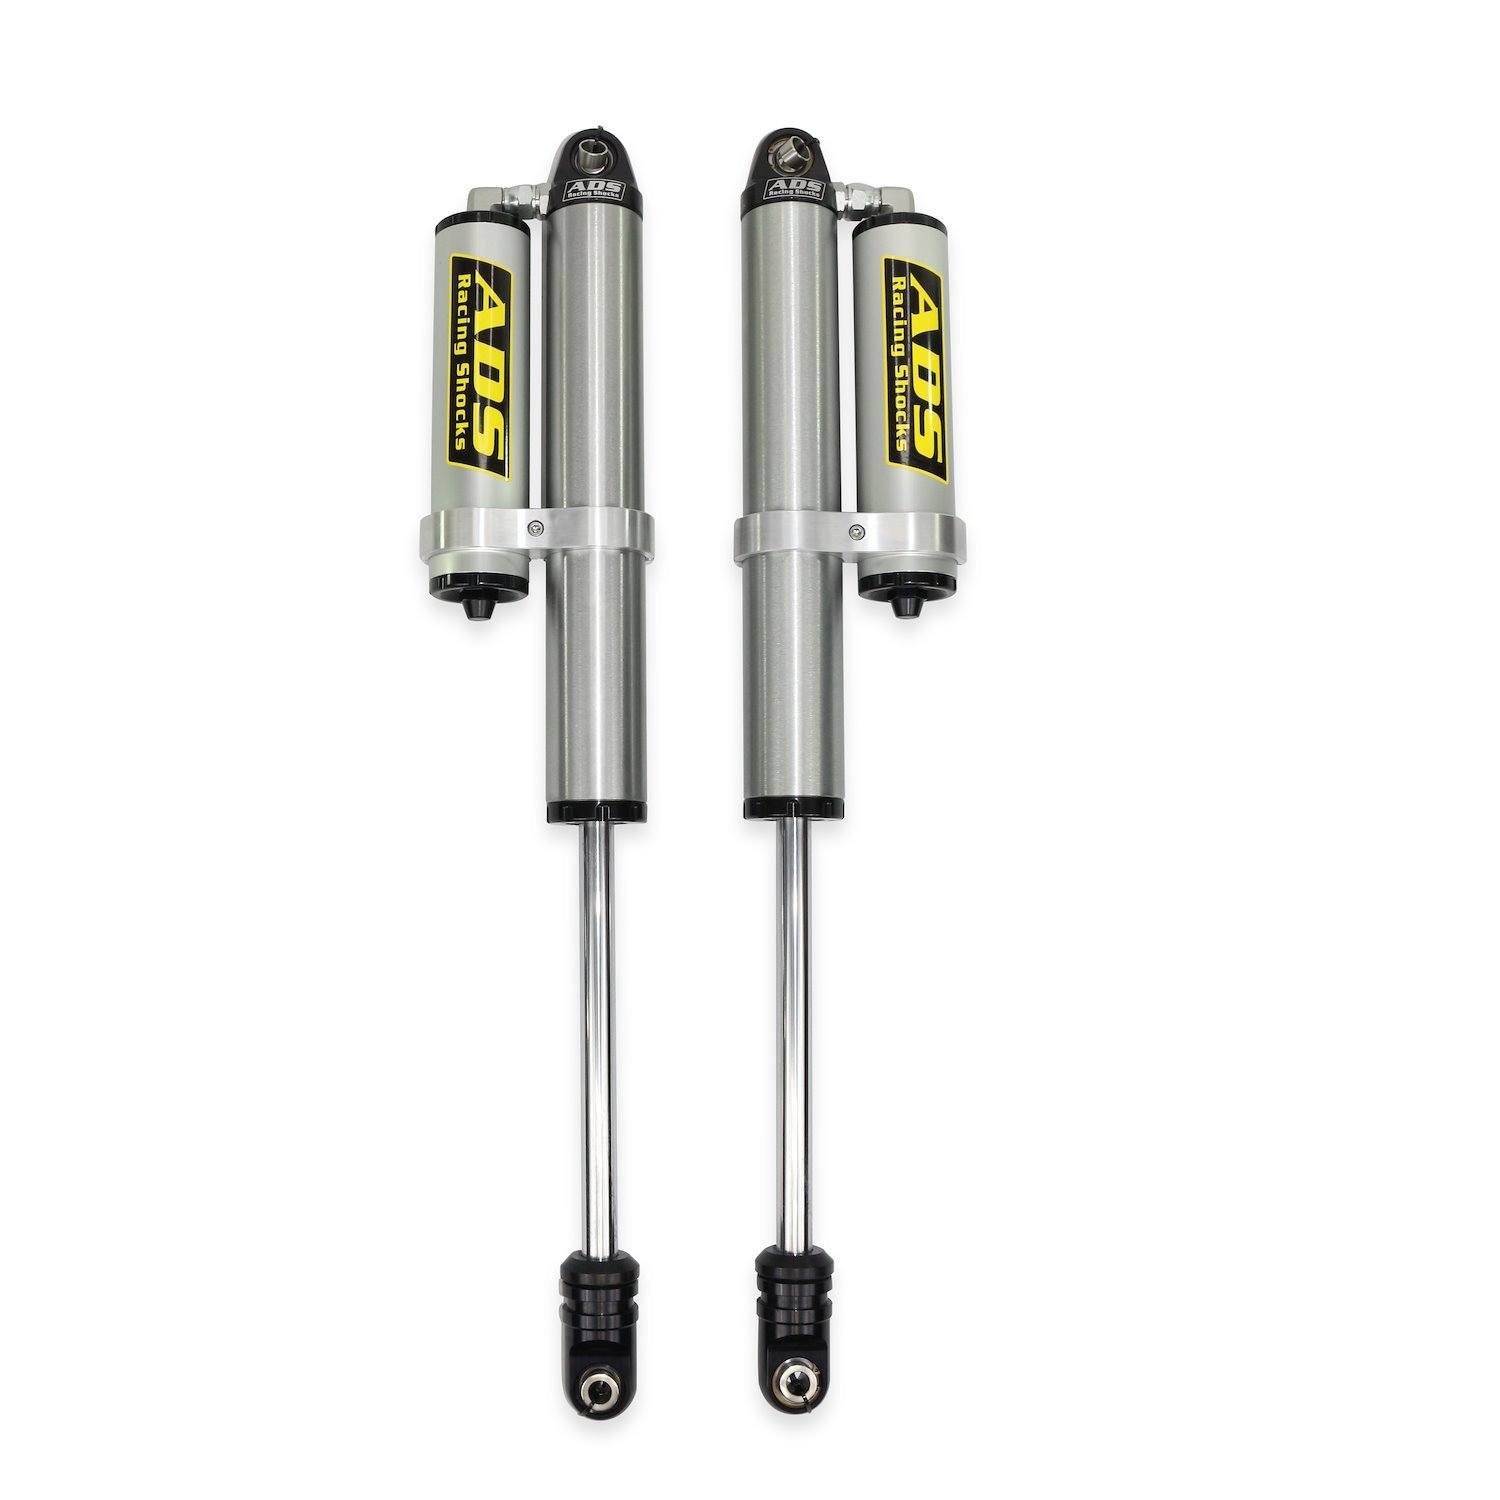 250-F2R45-000 Racing Bolt-On Shocks, Fits Select Ford F-250/F-350 SD, 2.5 in., For 0-1 in. Lift, w/ Piggy Back Reservoir